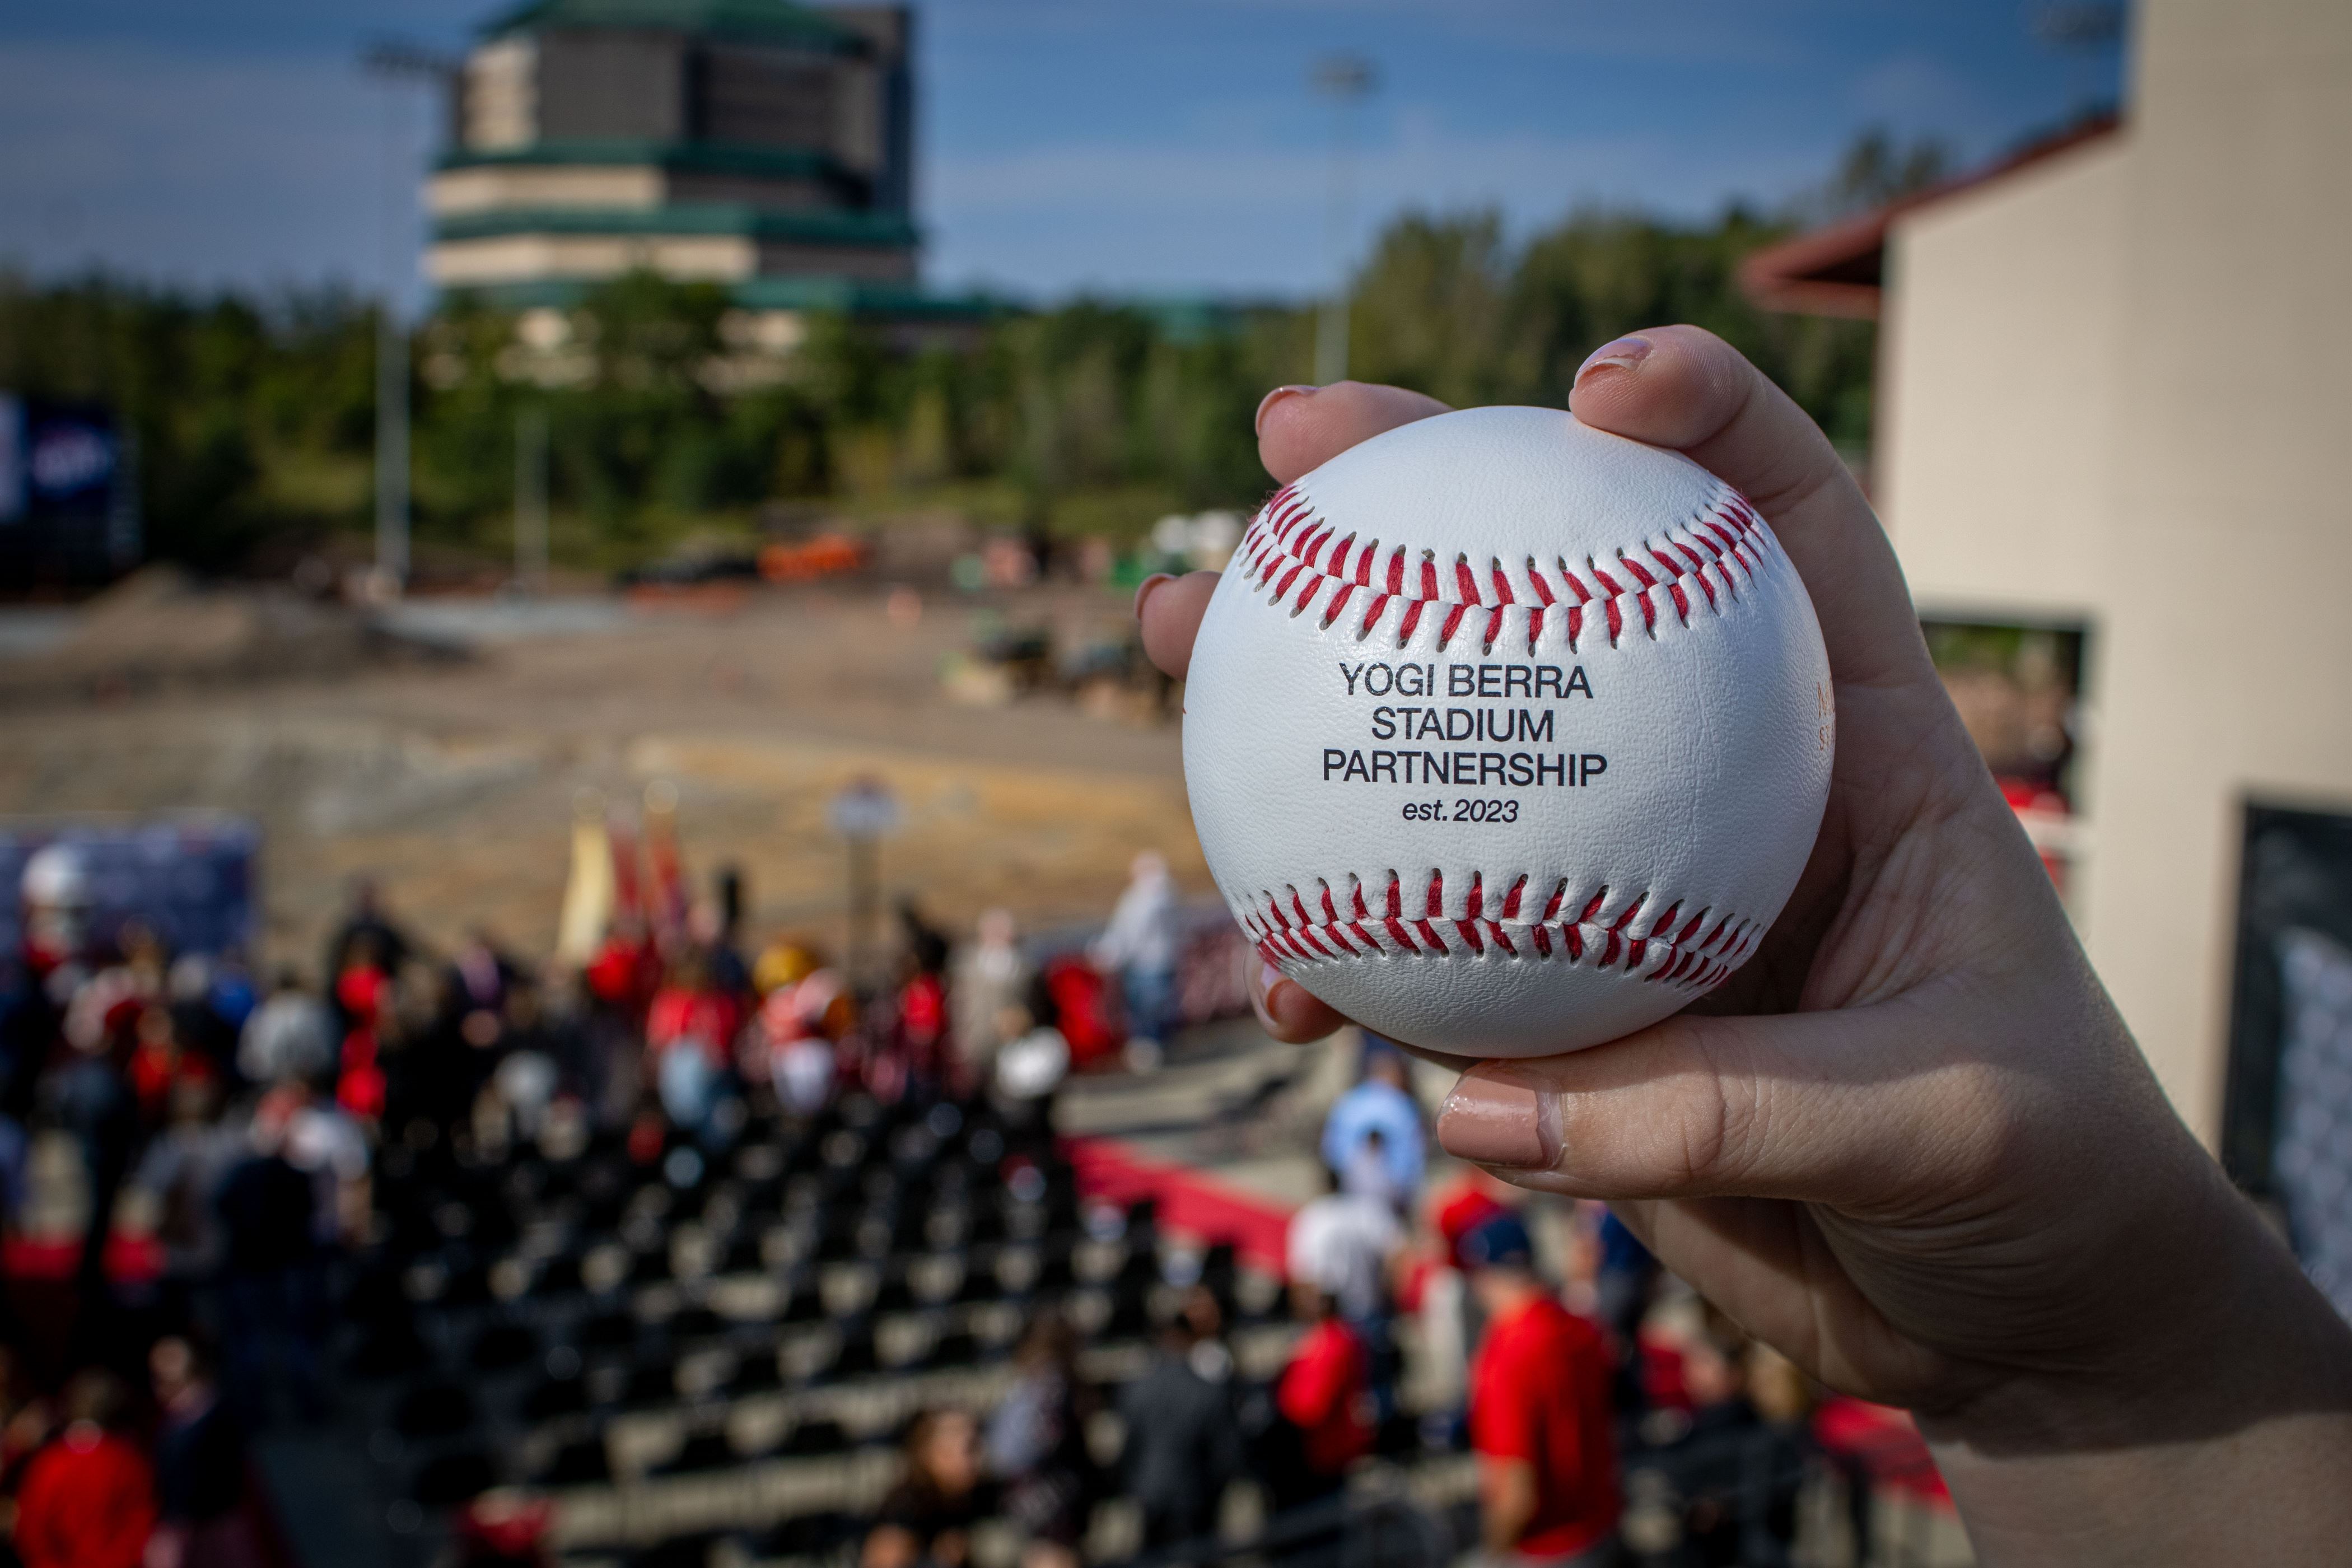 NJ Jackals baseball team moving to new home in Paterson 